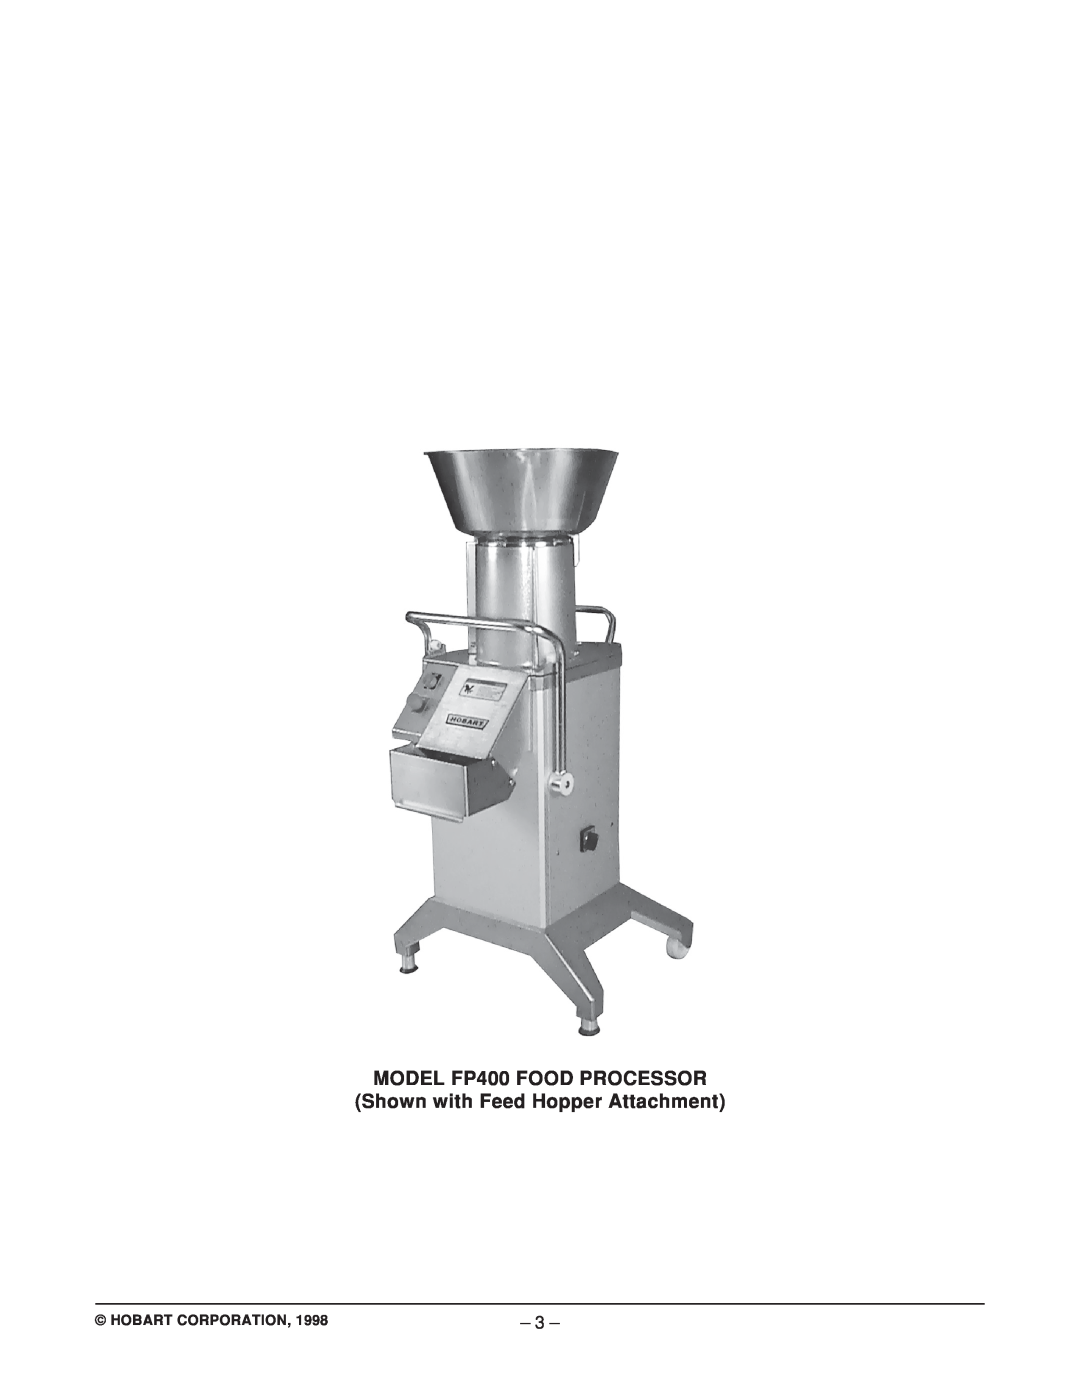 Hobart manual MODEL FP400 FOOD PROCESSOR Shown with Feed Hopper Attachment, Hobart Corporation 